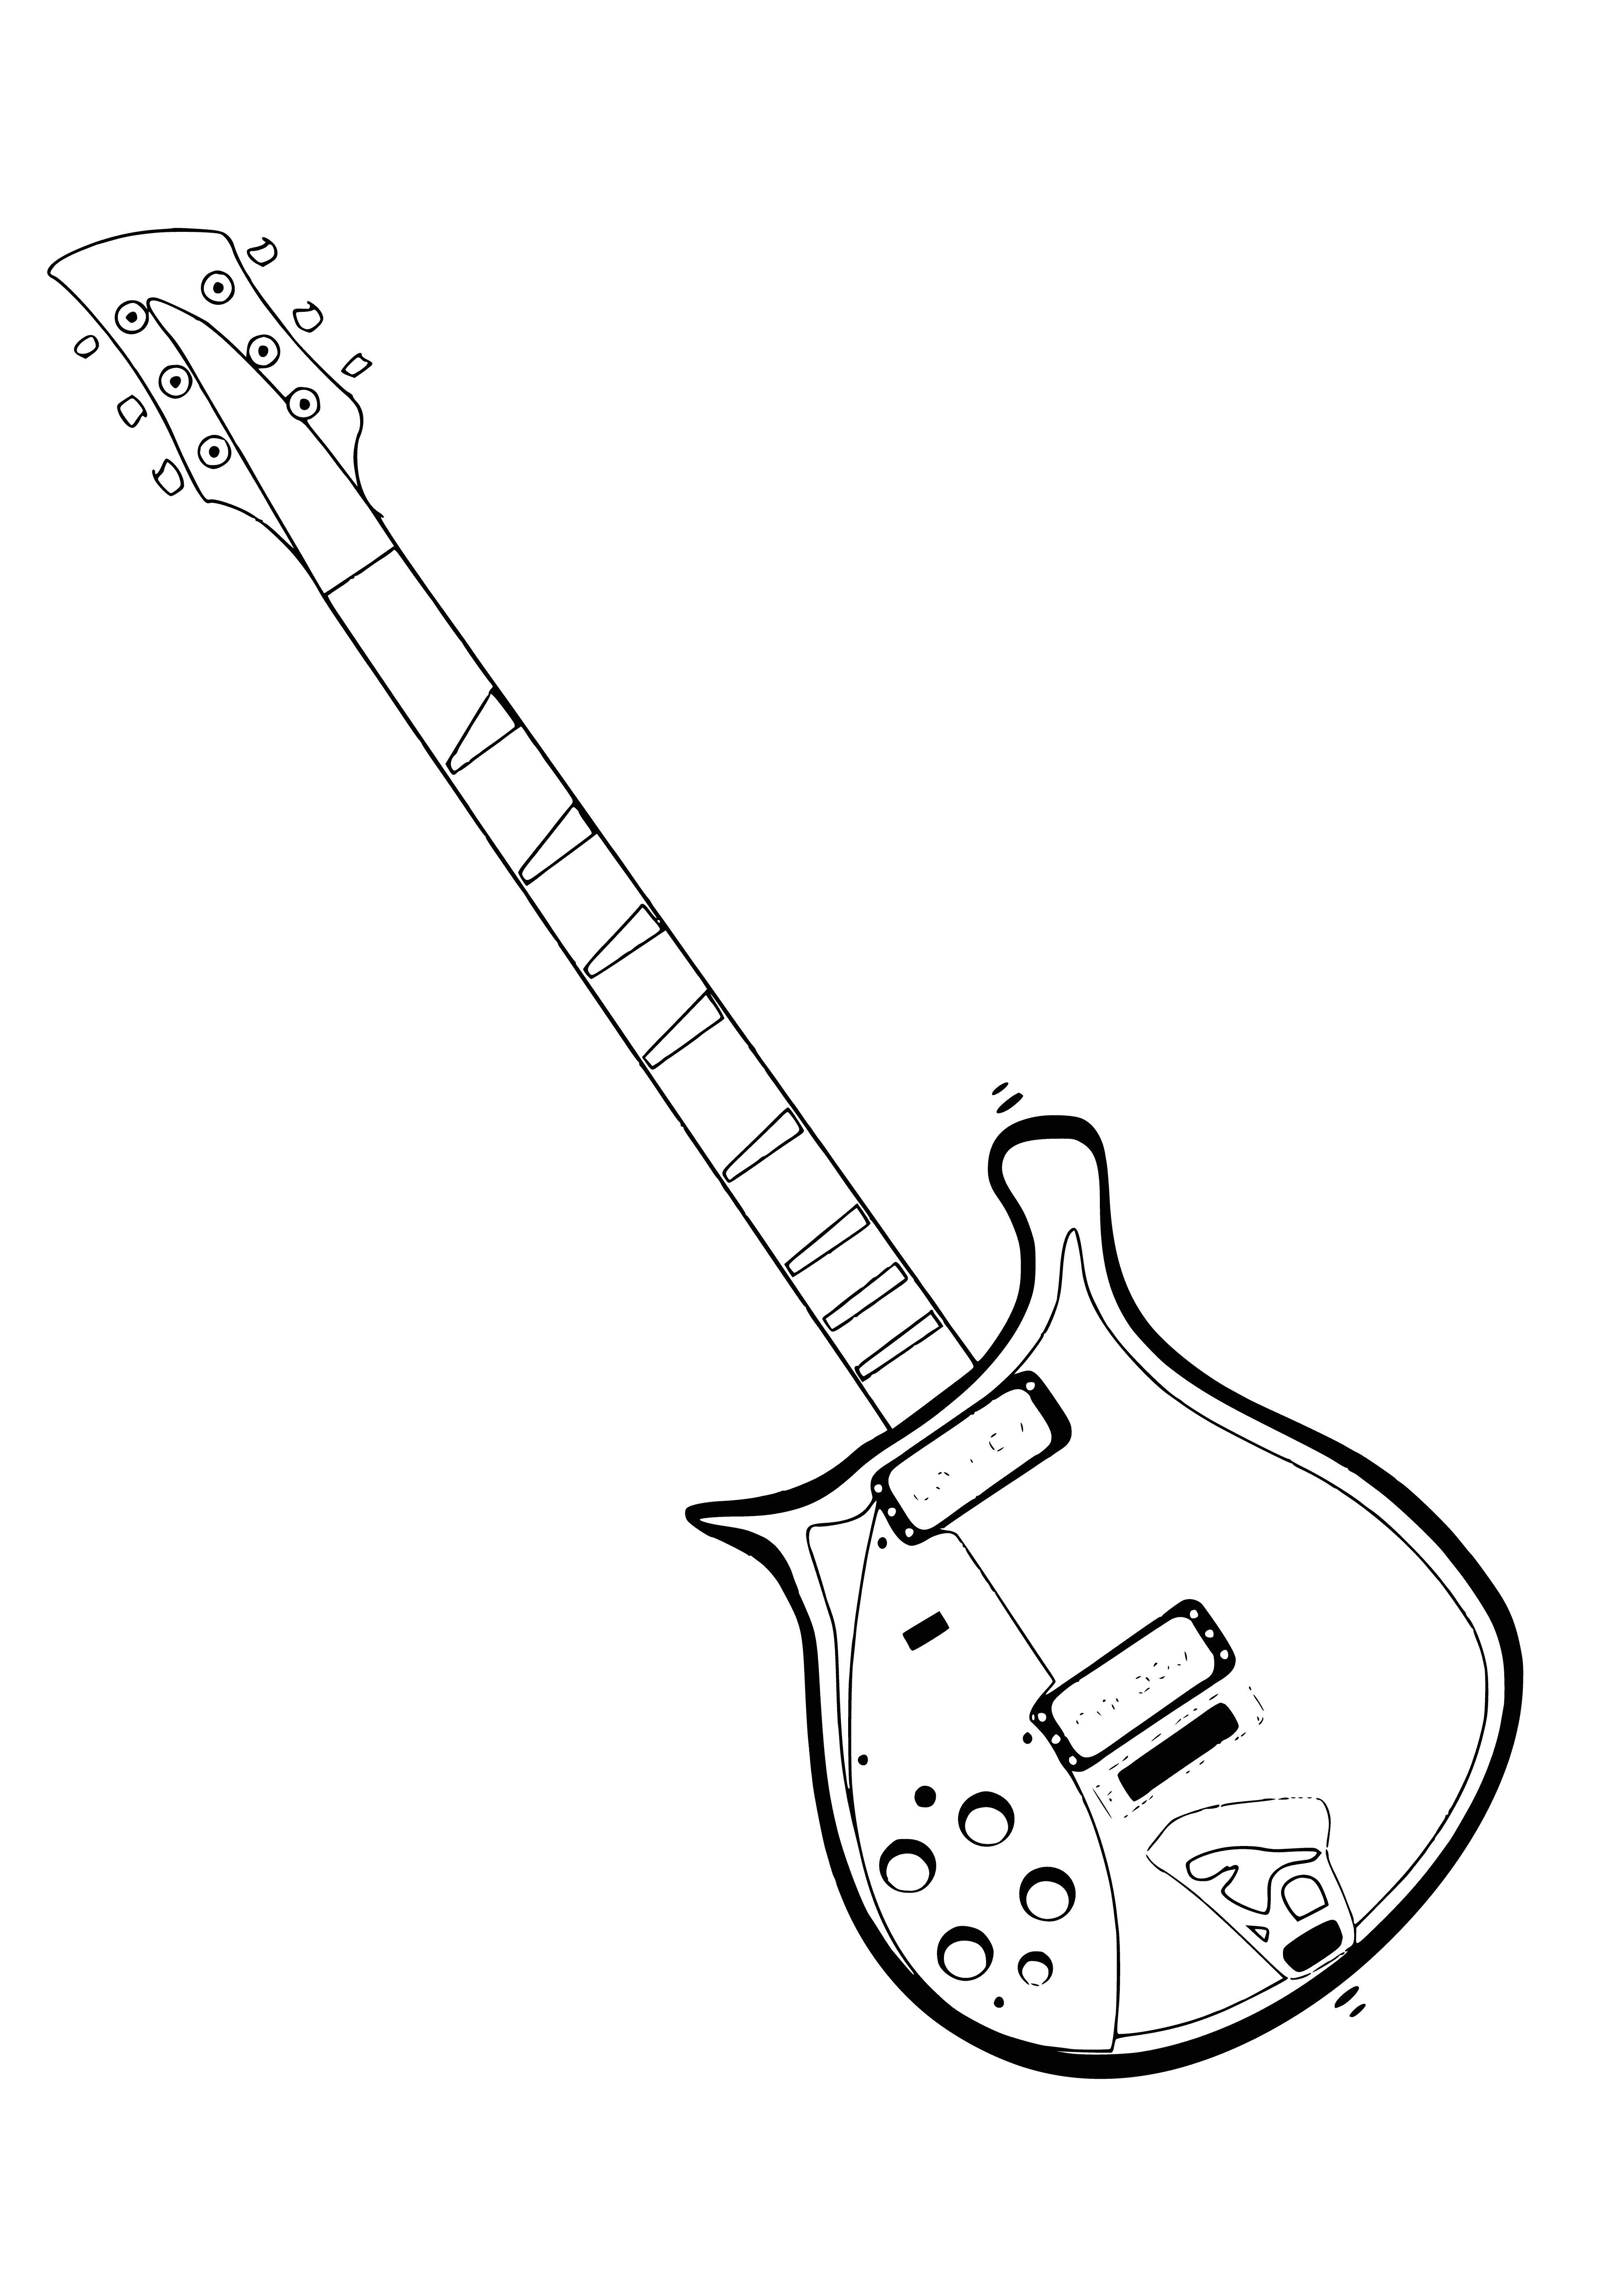 coloring page: Coloring page of acoustic guitar on stand: light brown body, dark brown strings, white pickguard, six tuning pegs, on black stand. #coloring